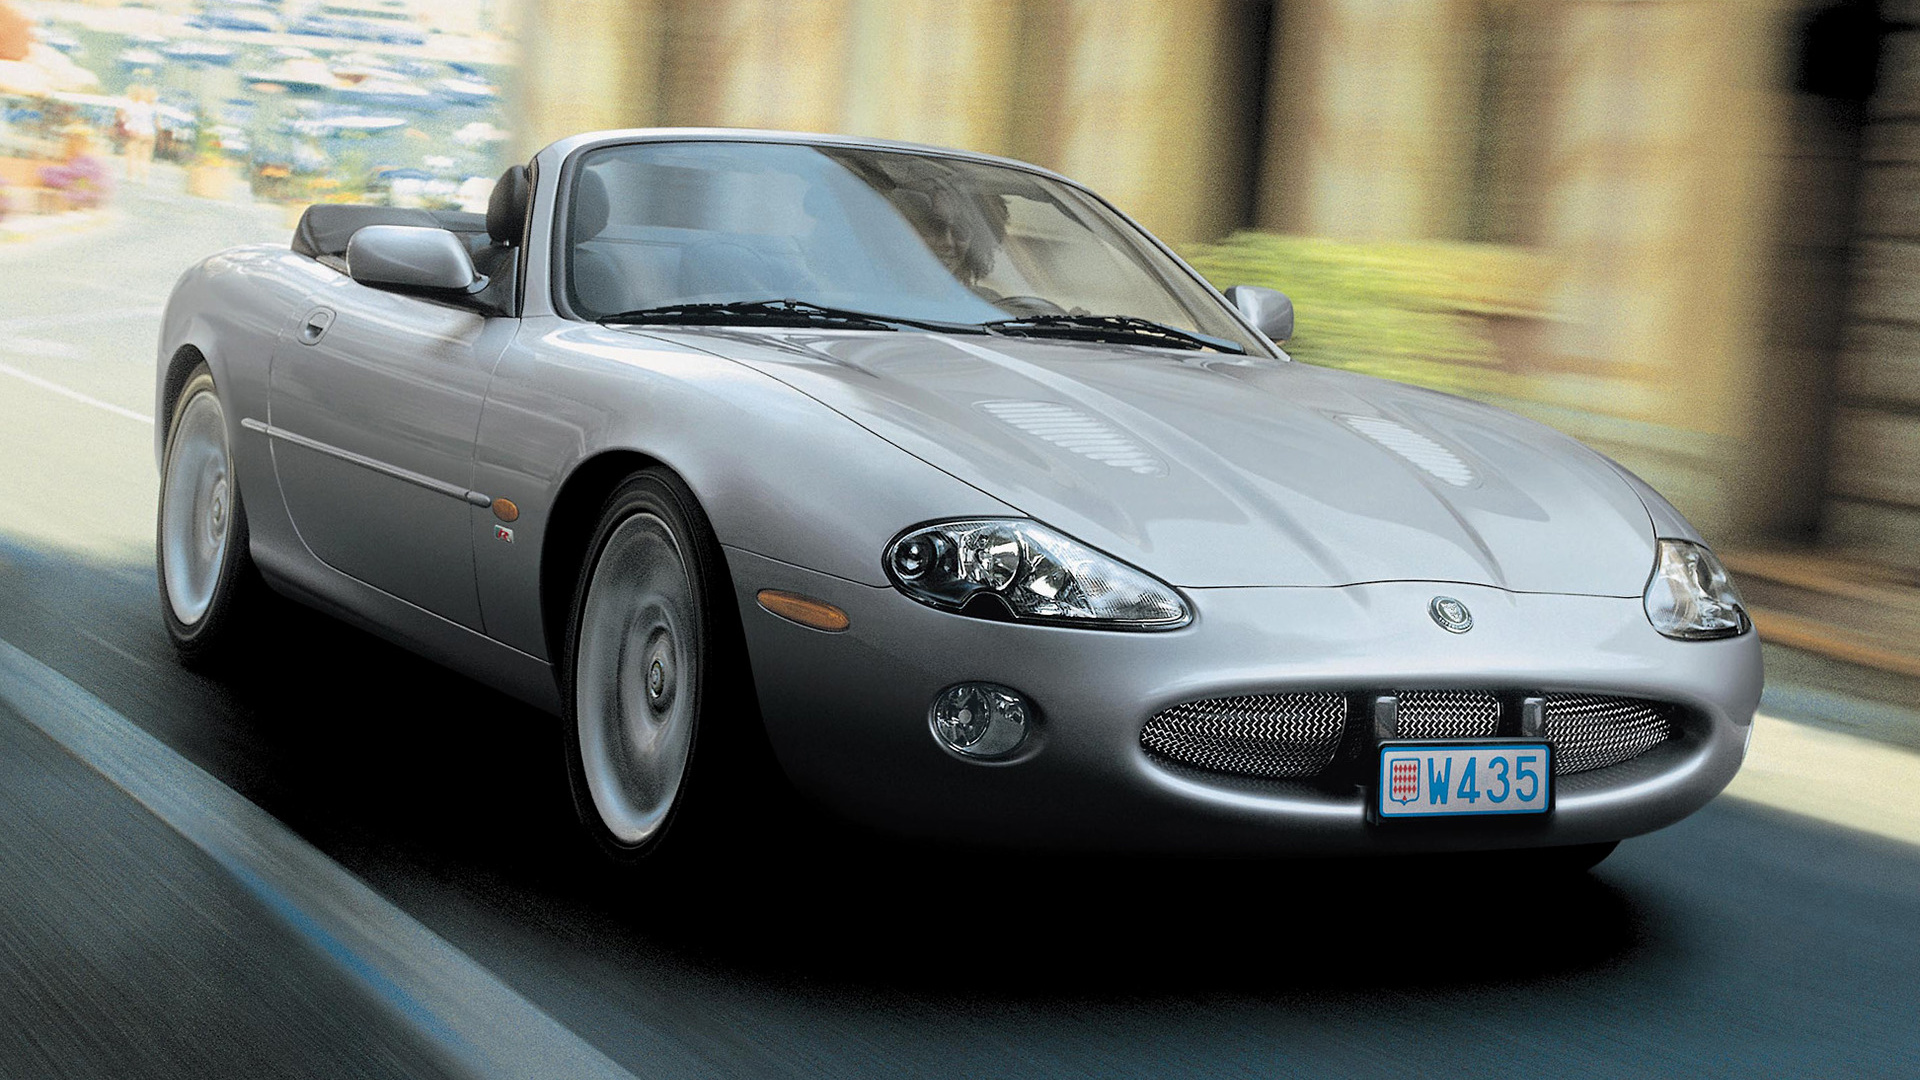 2003 Jaguar XKR Convertible - Wallpapers and HD Images ...